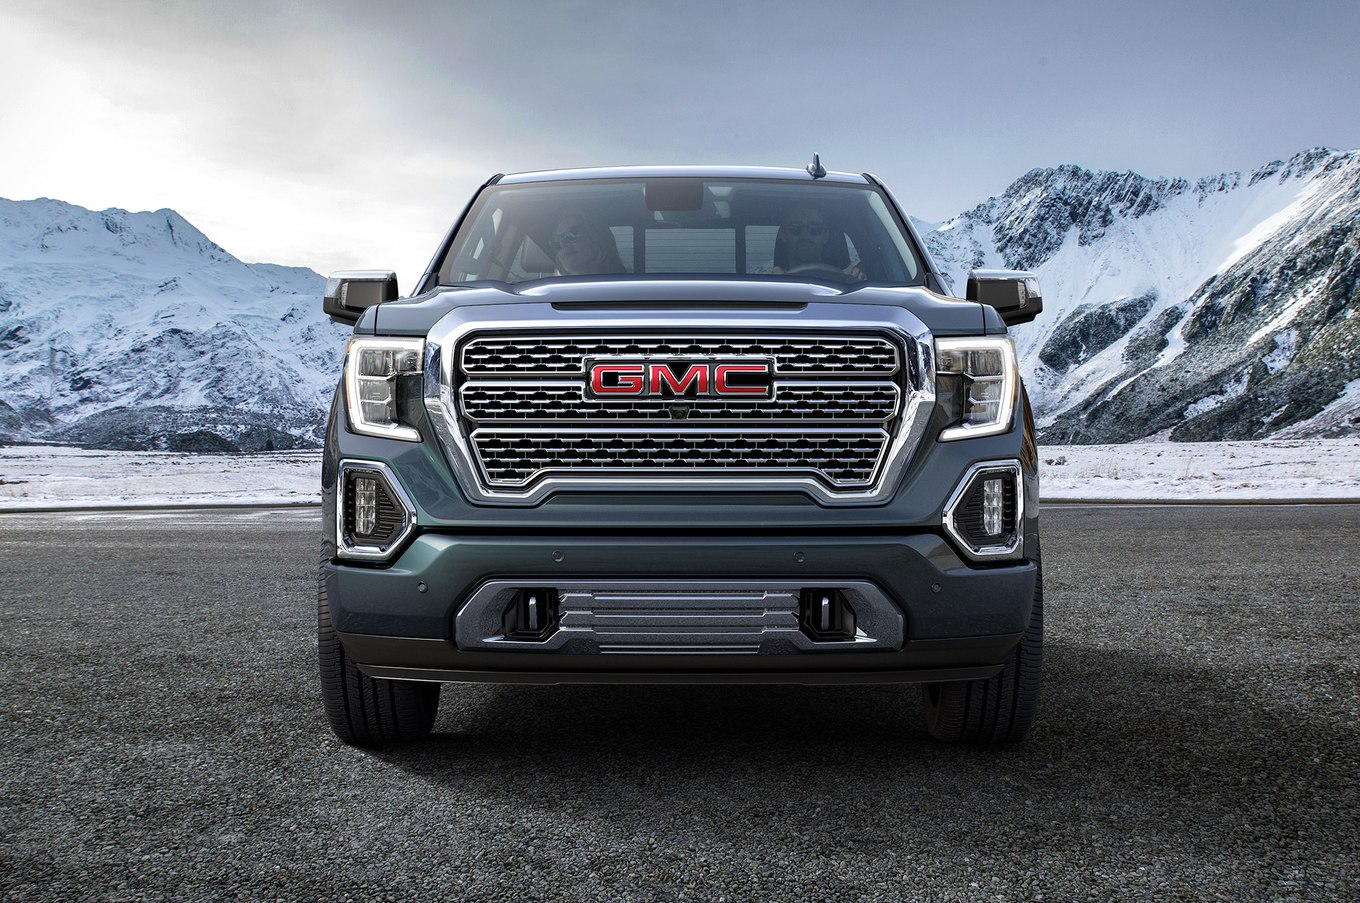 GMC Cars, SUV/Crossover, Truck, Van: Reviews & Prices | Motor Trend